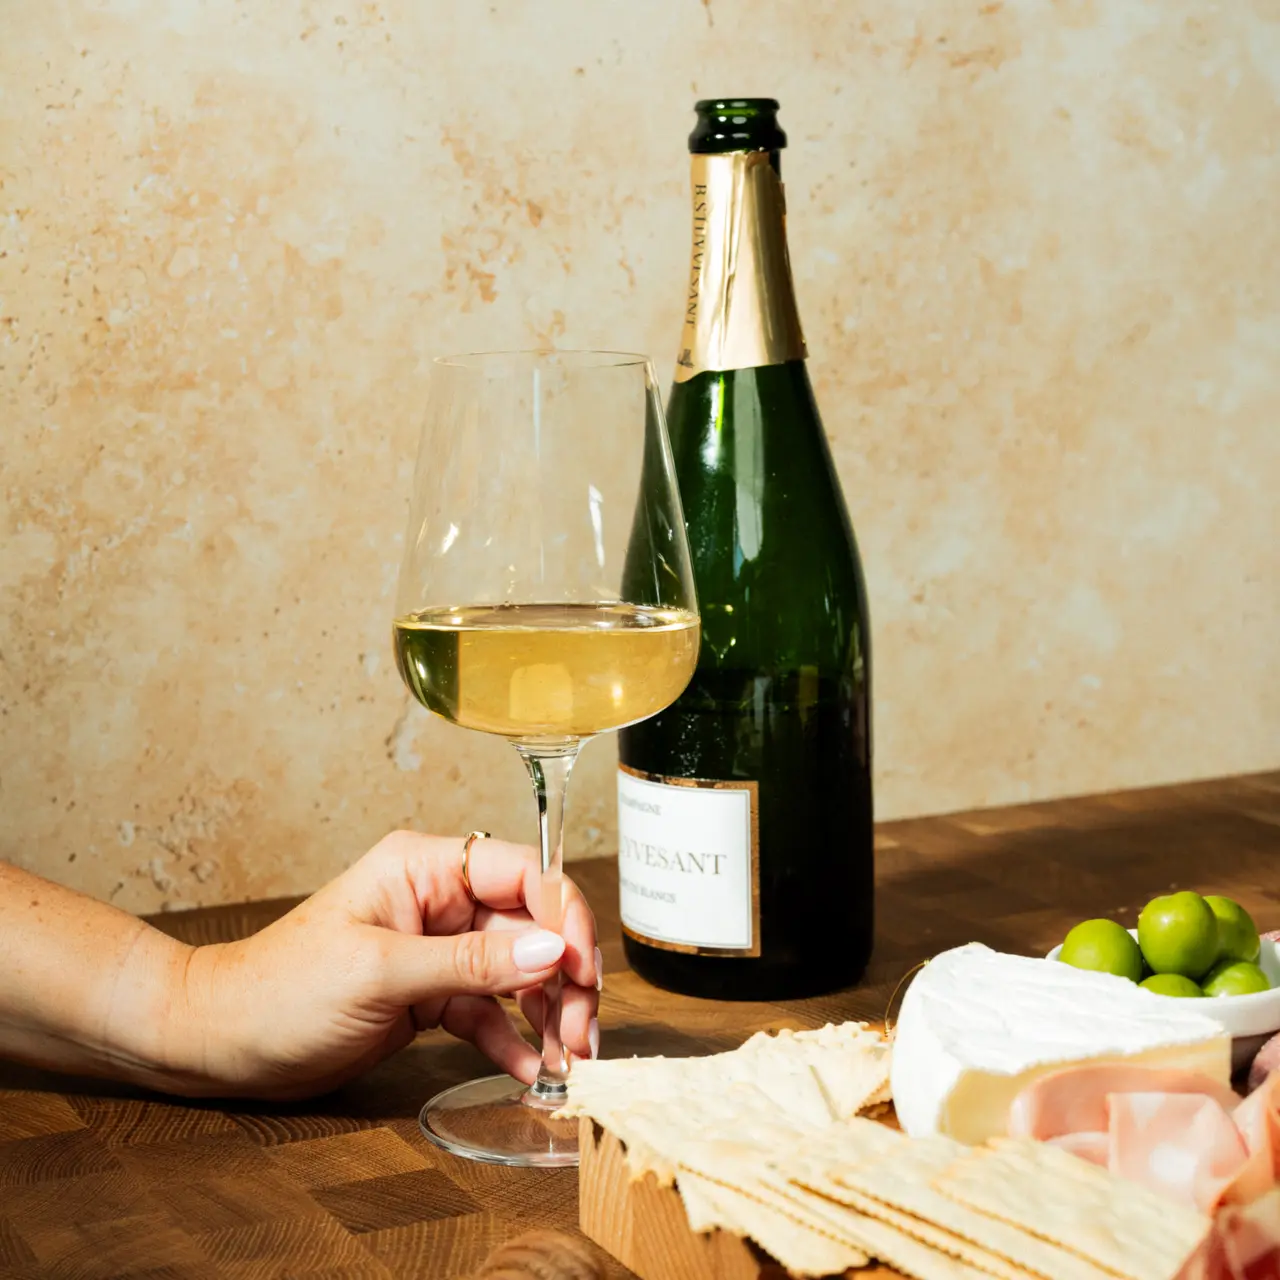 A hand holds a stemmed glass of white wine near a charcuterie board with cheese and meats, with a bottle in the background.